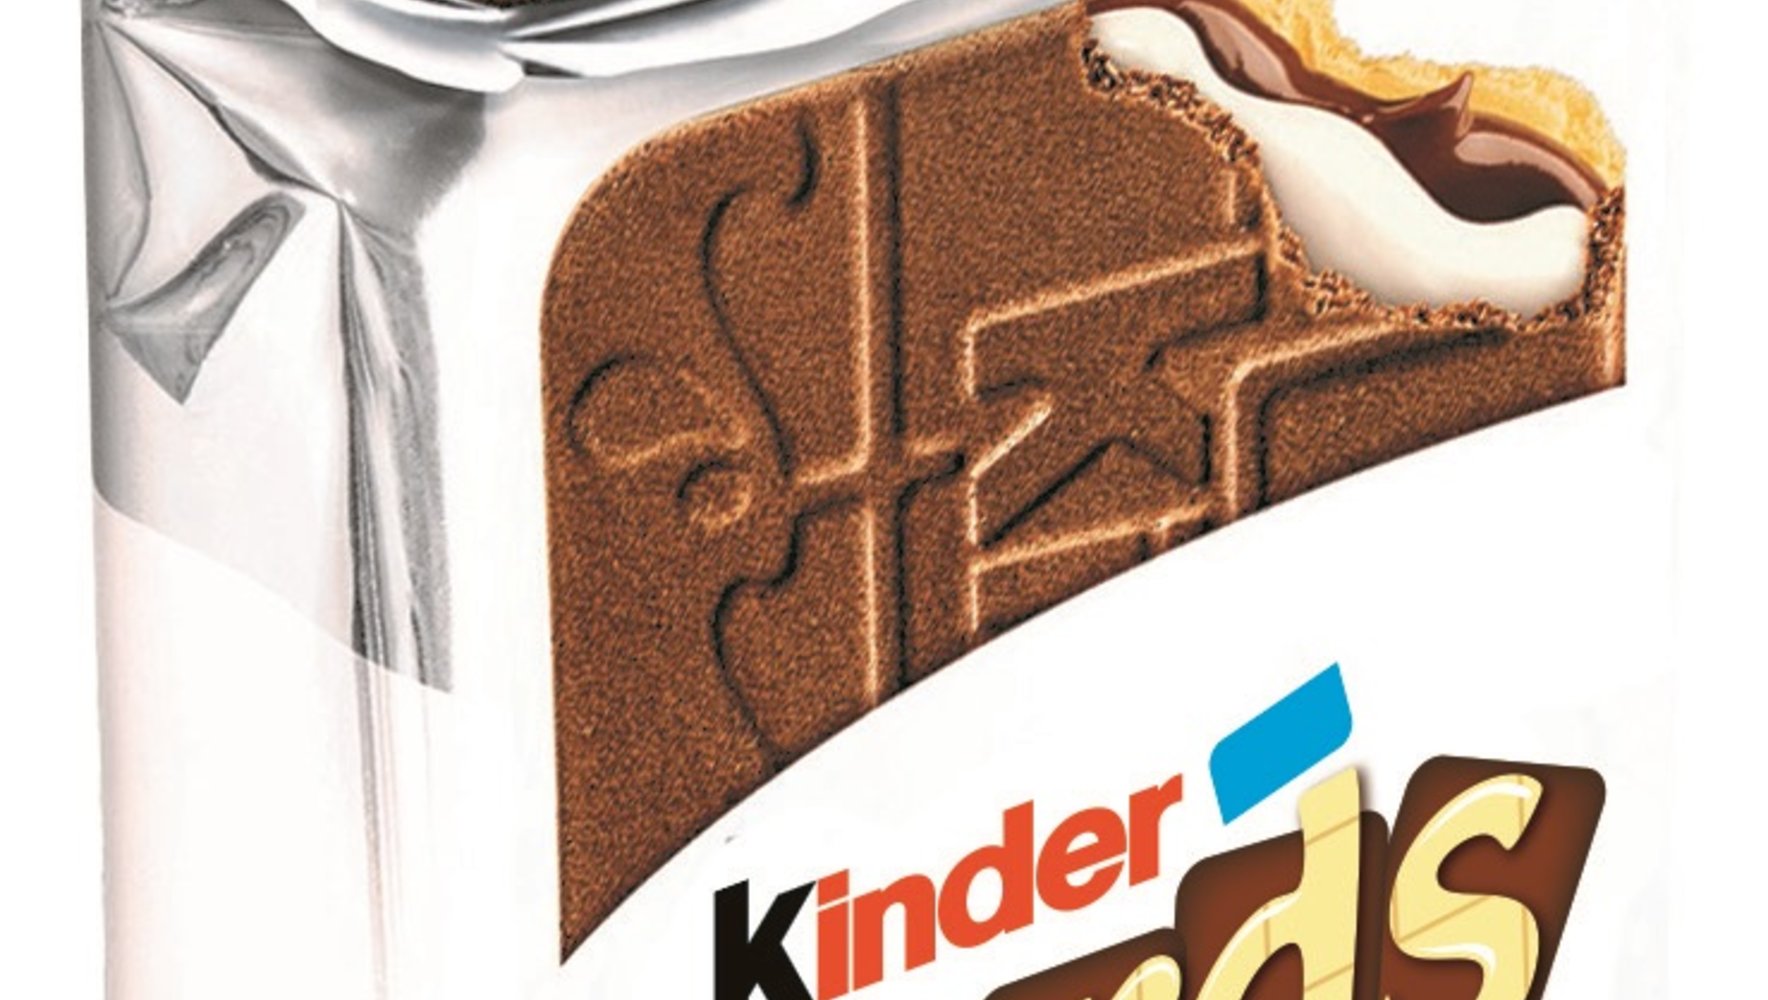 Your Perfect Store by Ferrero - Ferrero deals retailers a winning hand with  launch of Kinder Cards